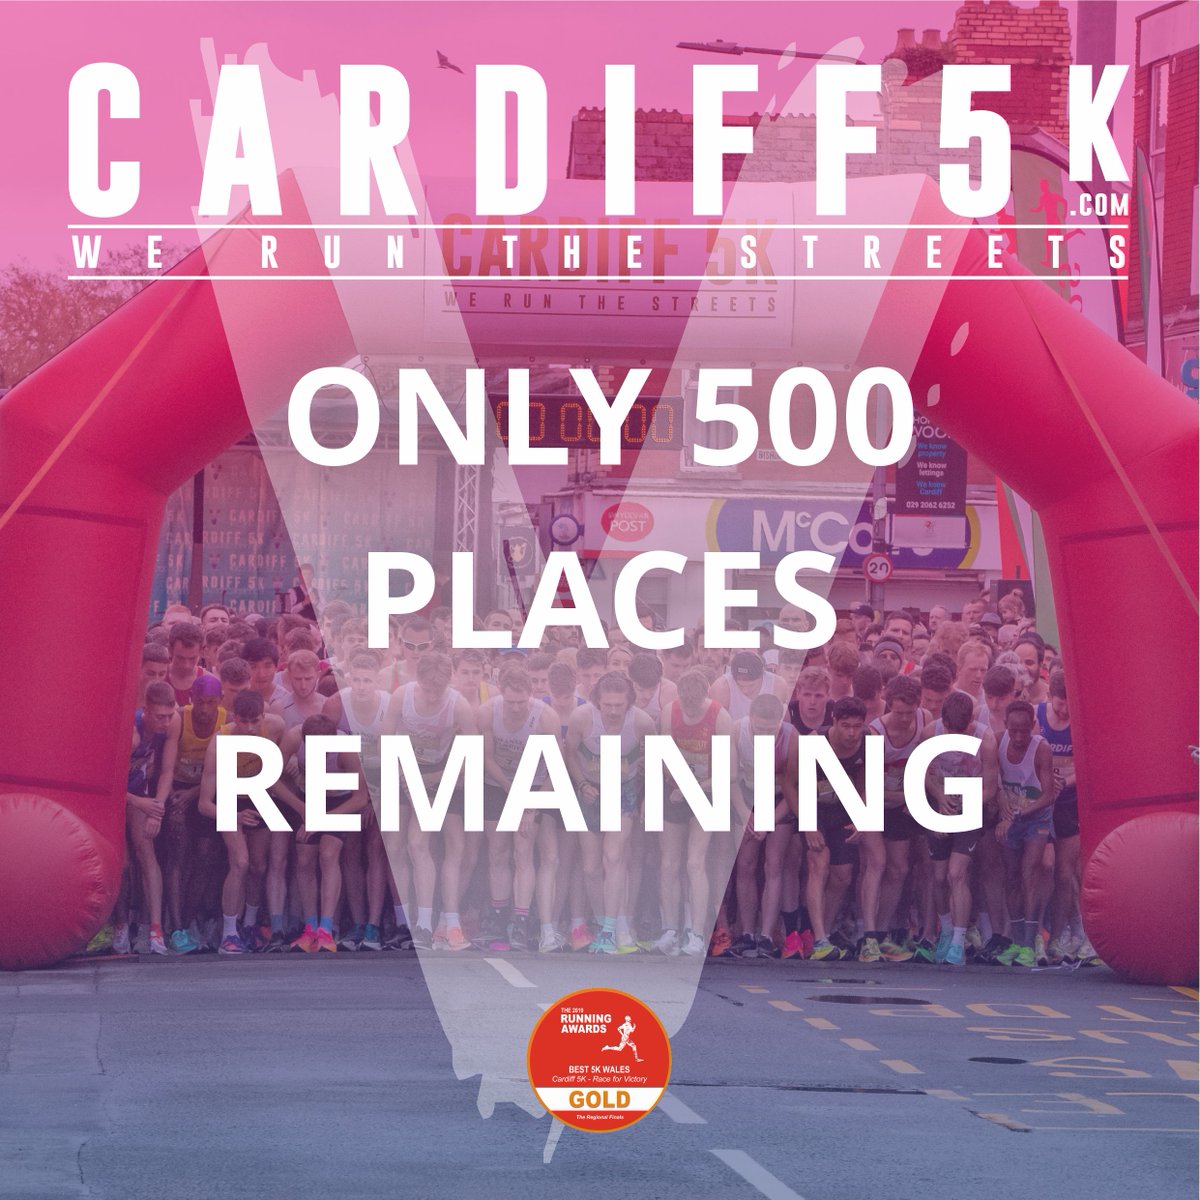 🏁Sunday 5th May 2024 @Cardiff5K 🏴󠁧󠁢󠁷󠁬󠁳󠁿Sign Up NOW Cardiff5K.com to run this unique once a year closed road route 👌 @whs_cardiff @SWalesAthletics @WWalesAthletics @AllWalesSport @runrepublic @racecheck @podium5k @EventsNWales @CardiffTimes @Cardifftweeter @Dai_Sport_